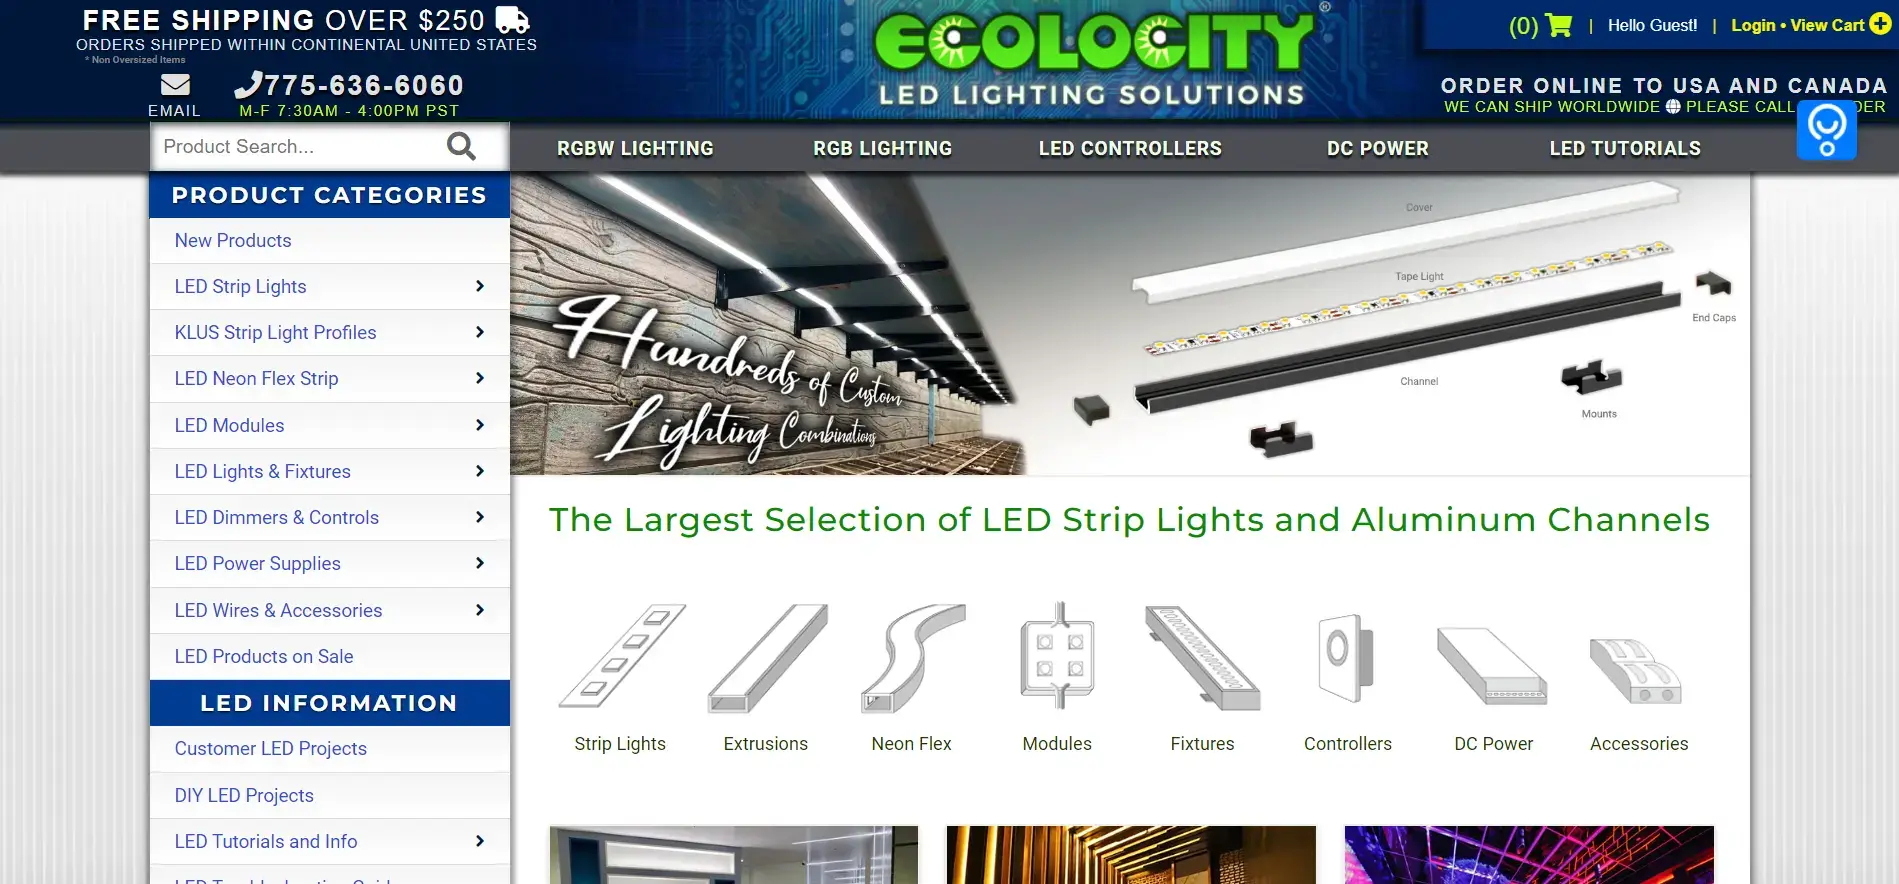 LED Light Controllers for LED Lights - Ecolocity LED